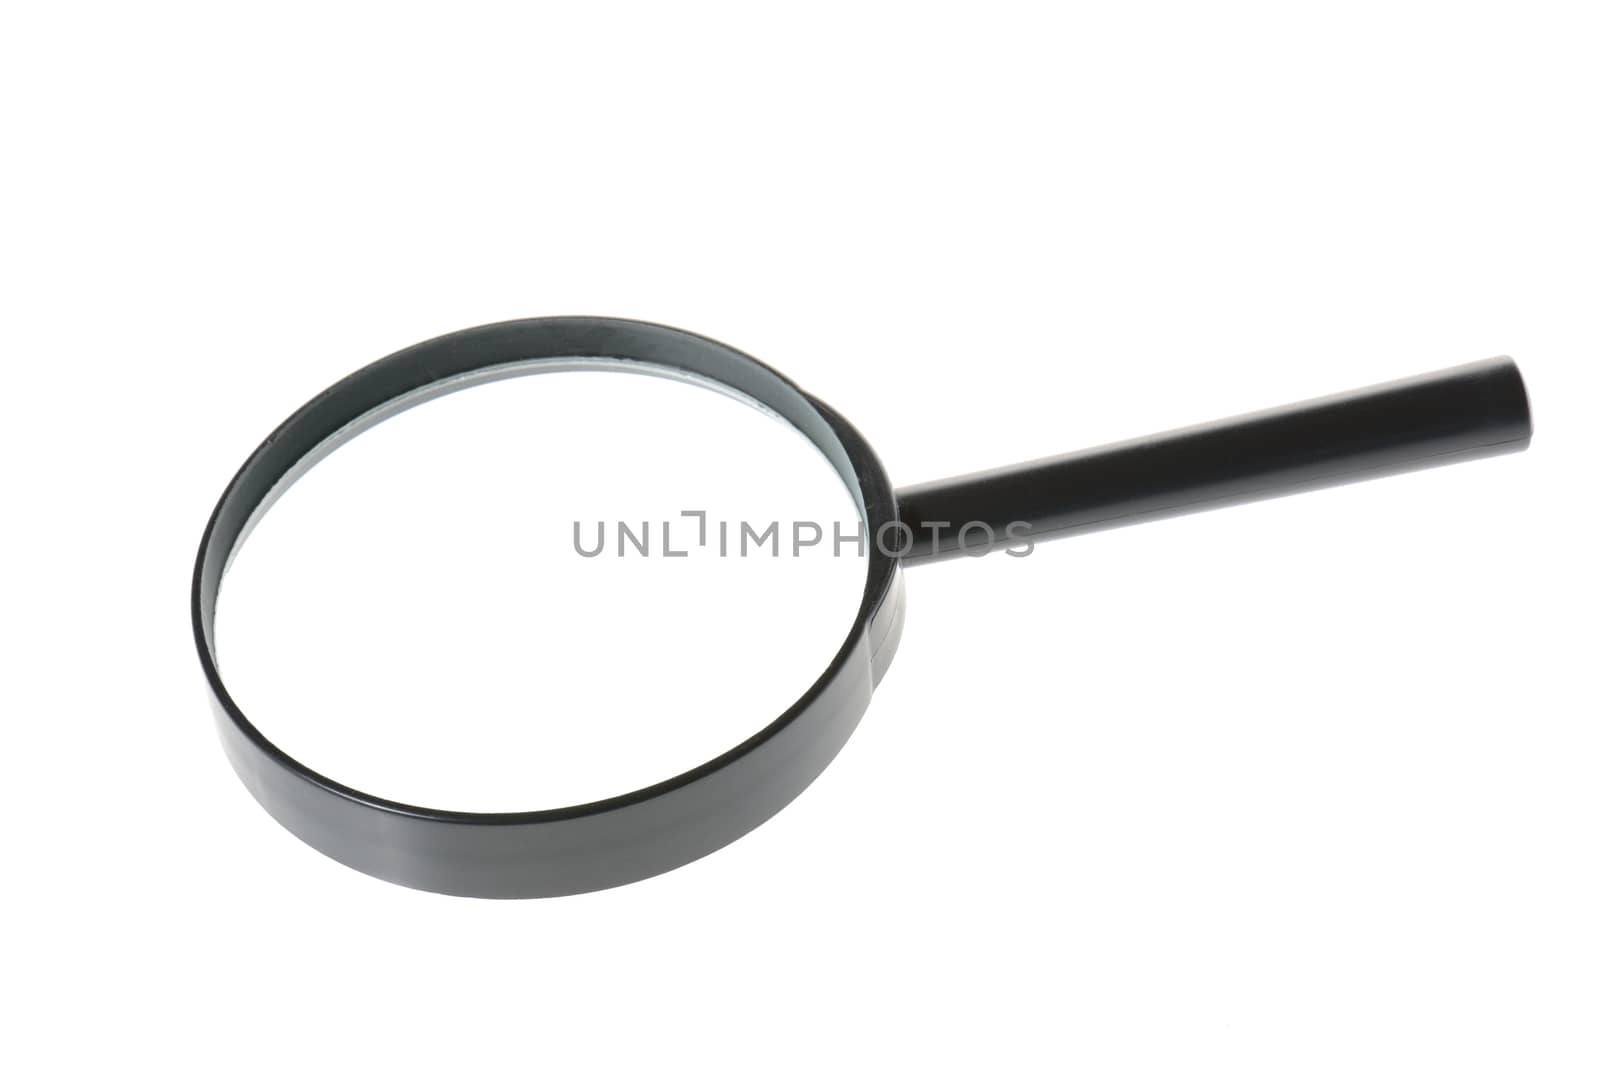 magnifying glass by hyrons